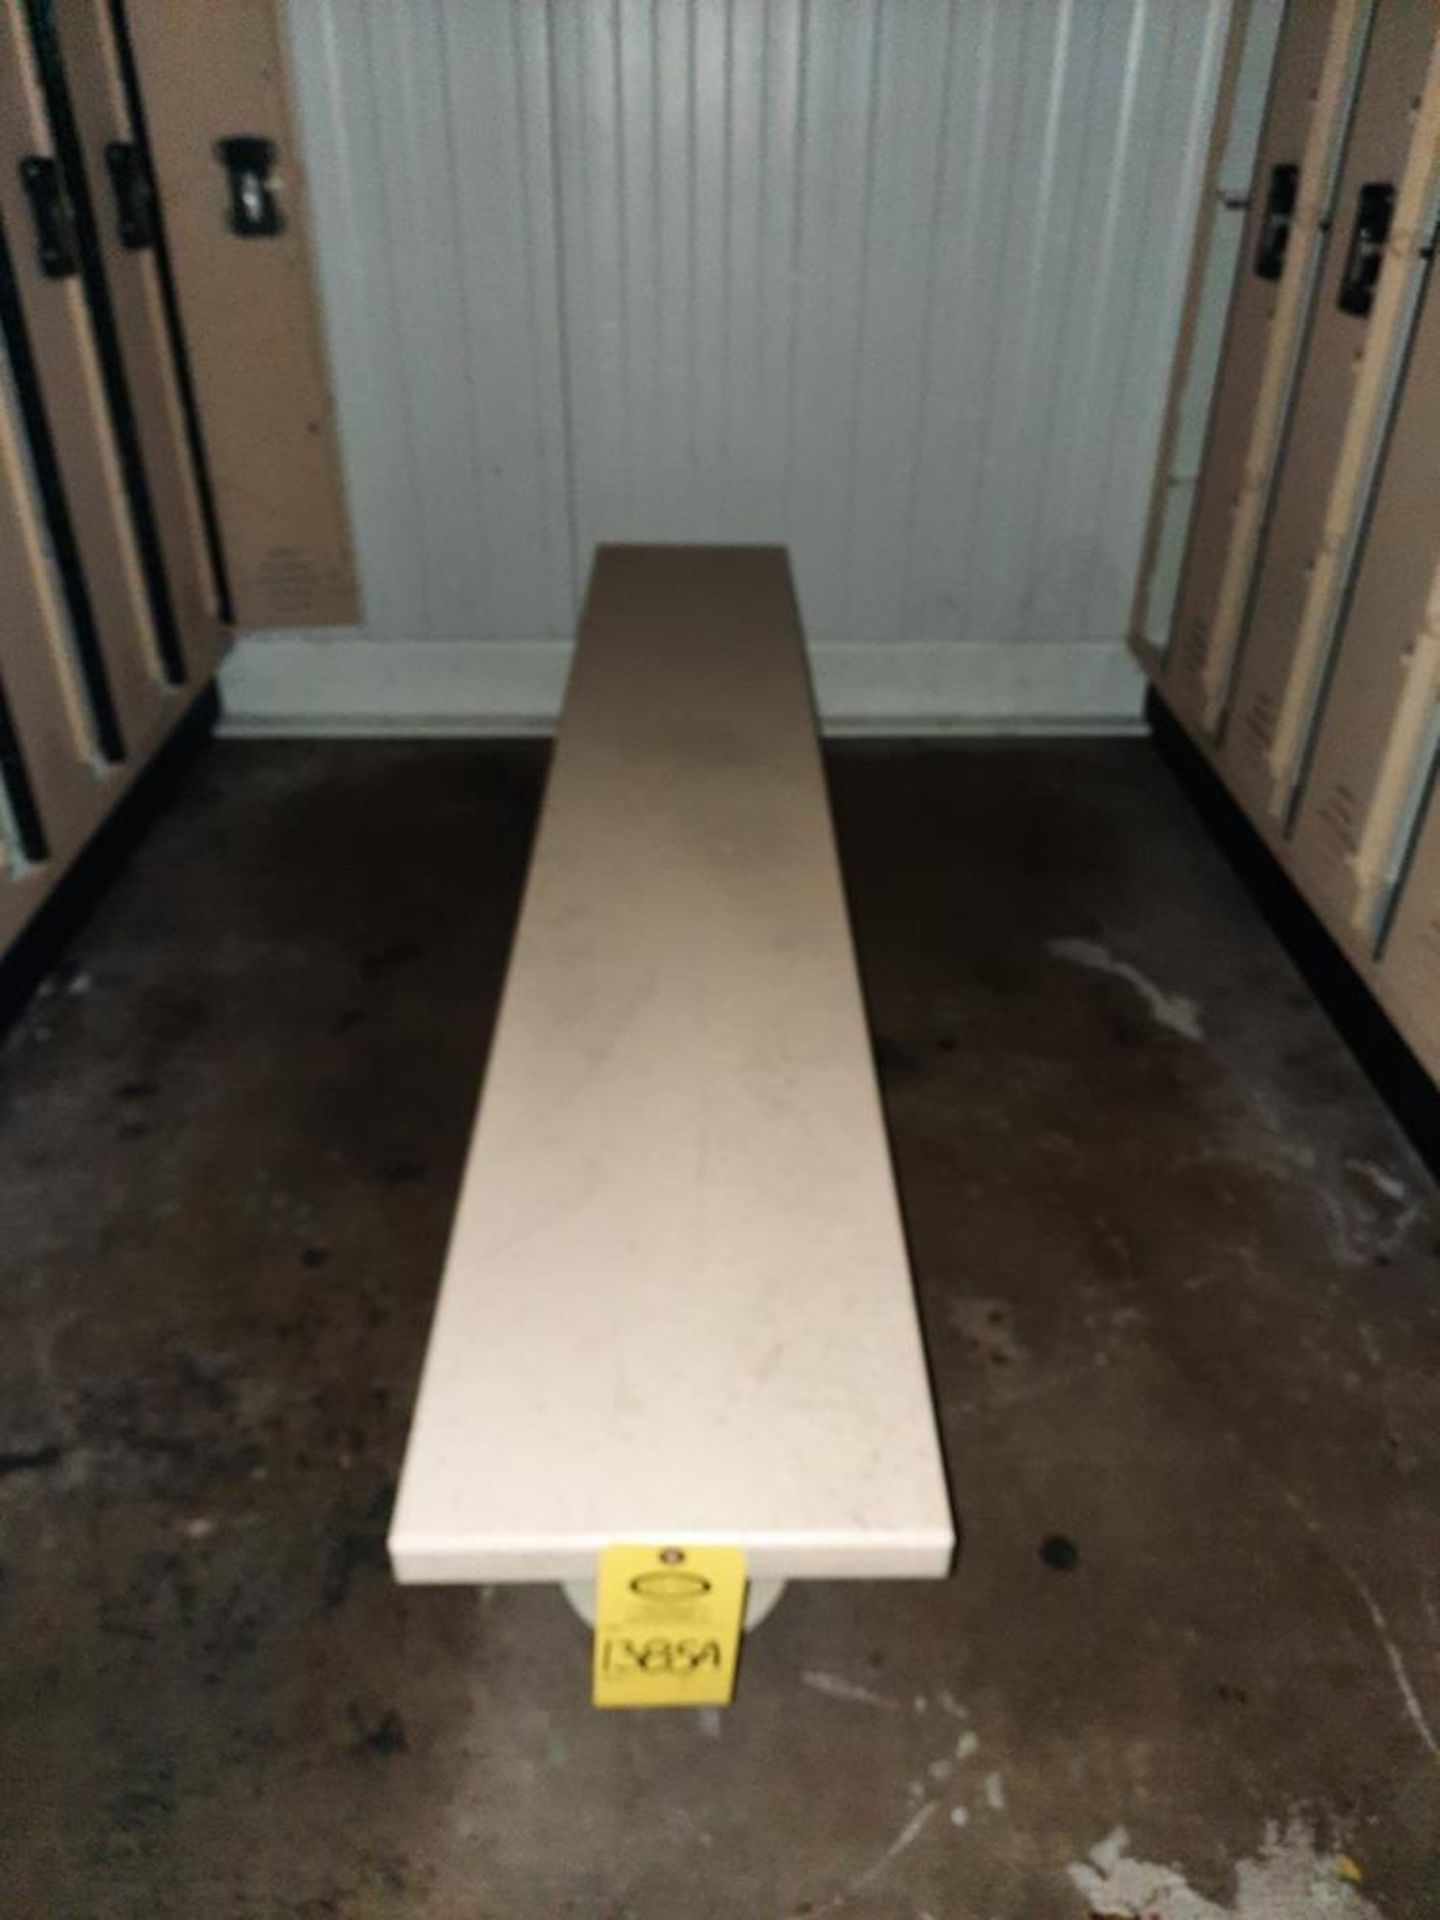 Bench, 12" W X 6' L: Required Loading Fee $50.00, Rigger-Norm Pavlish, Nebraska Stainless (402)540-